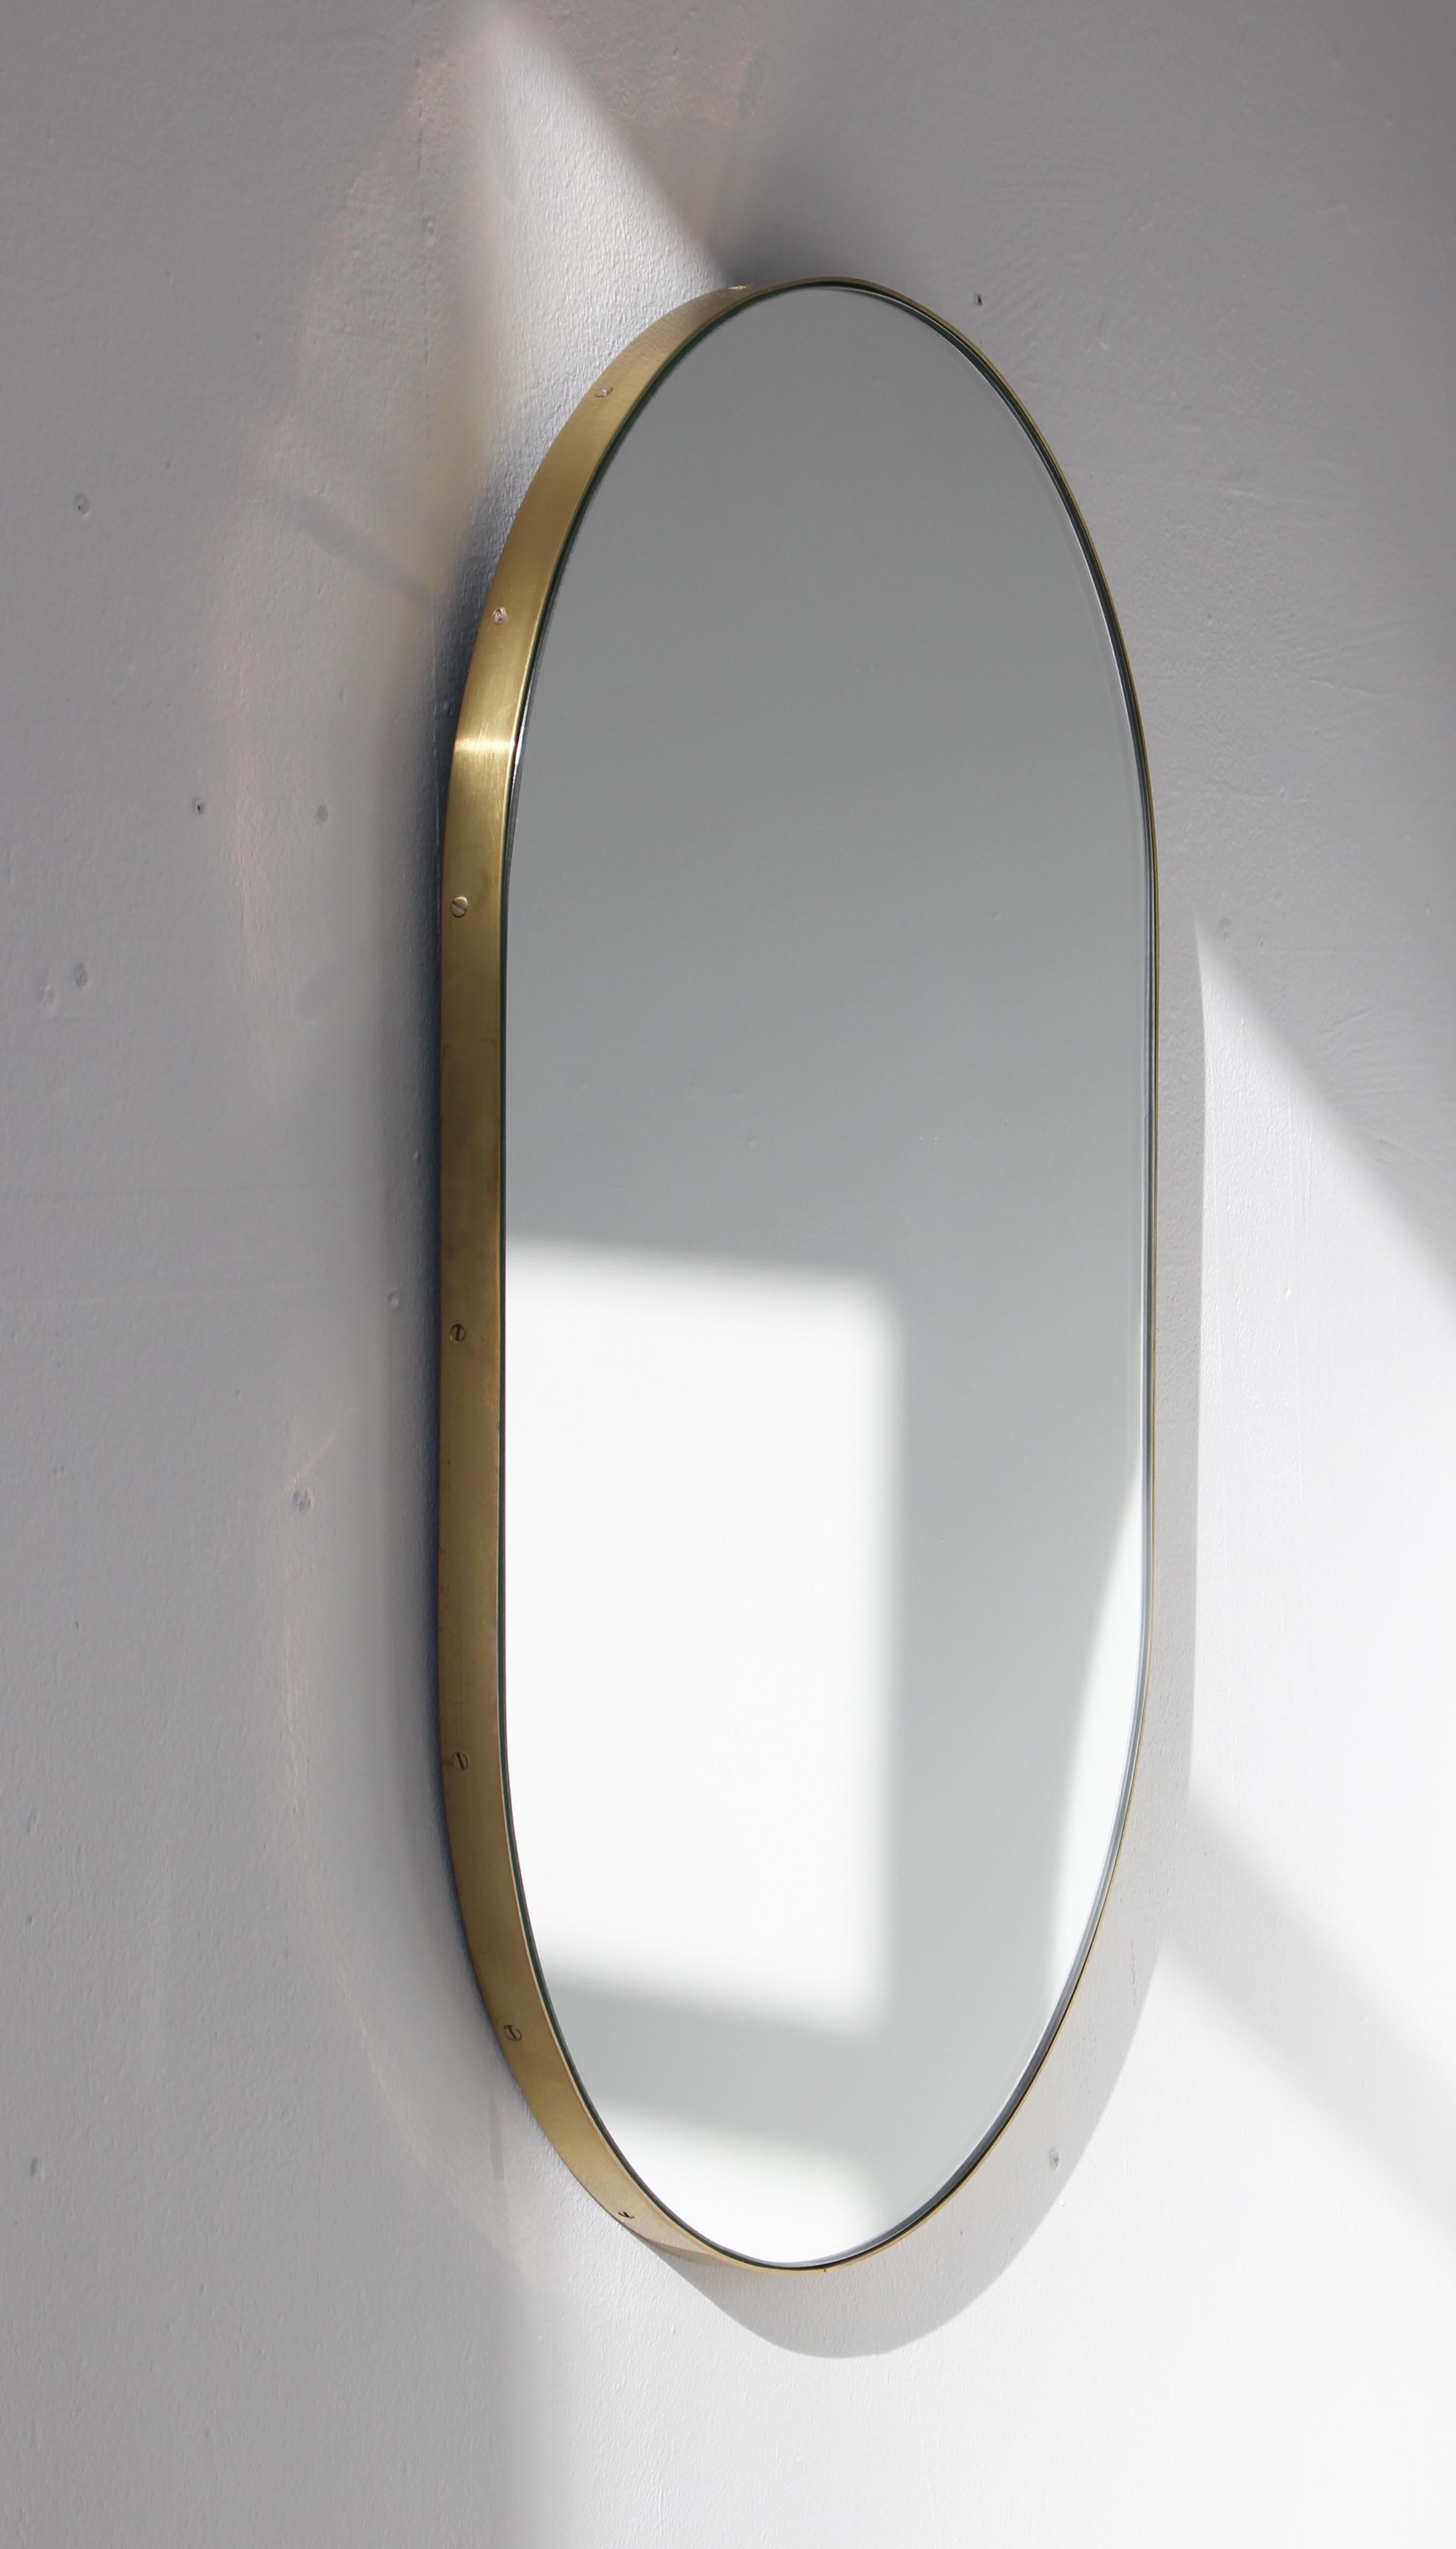 Delightful handcrafted silver capsule shaped mirror with a brass frame.

Ideal above a console table in the hallway, above a beautiful fireplace, in the bedroom or in the bathroom.

Available with a bronze or black tint.

Measures: W 370 x H